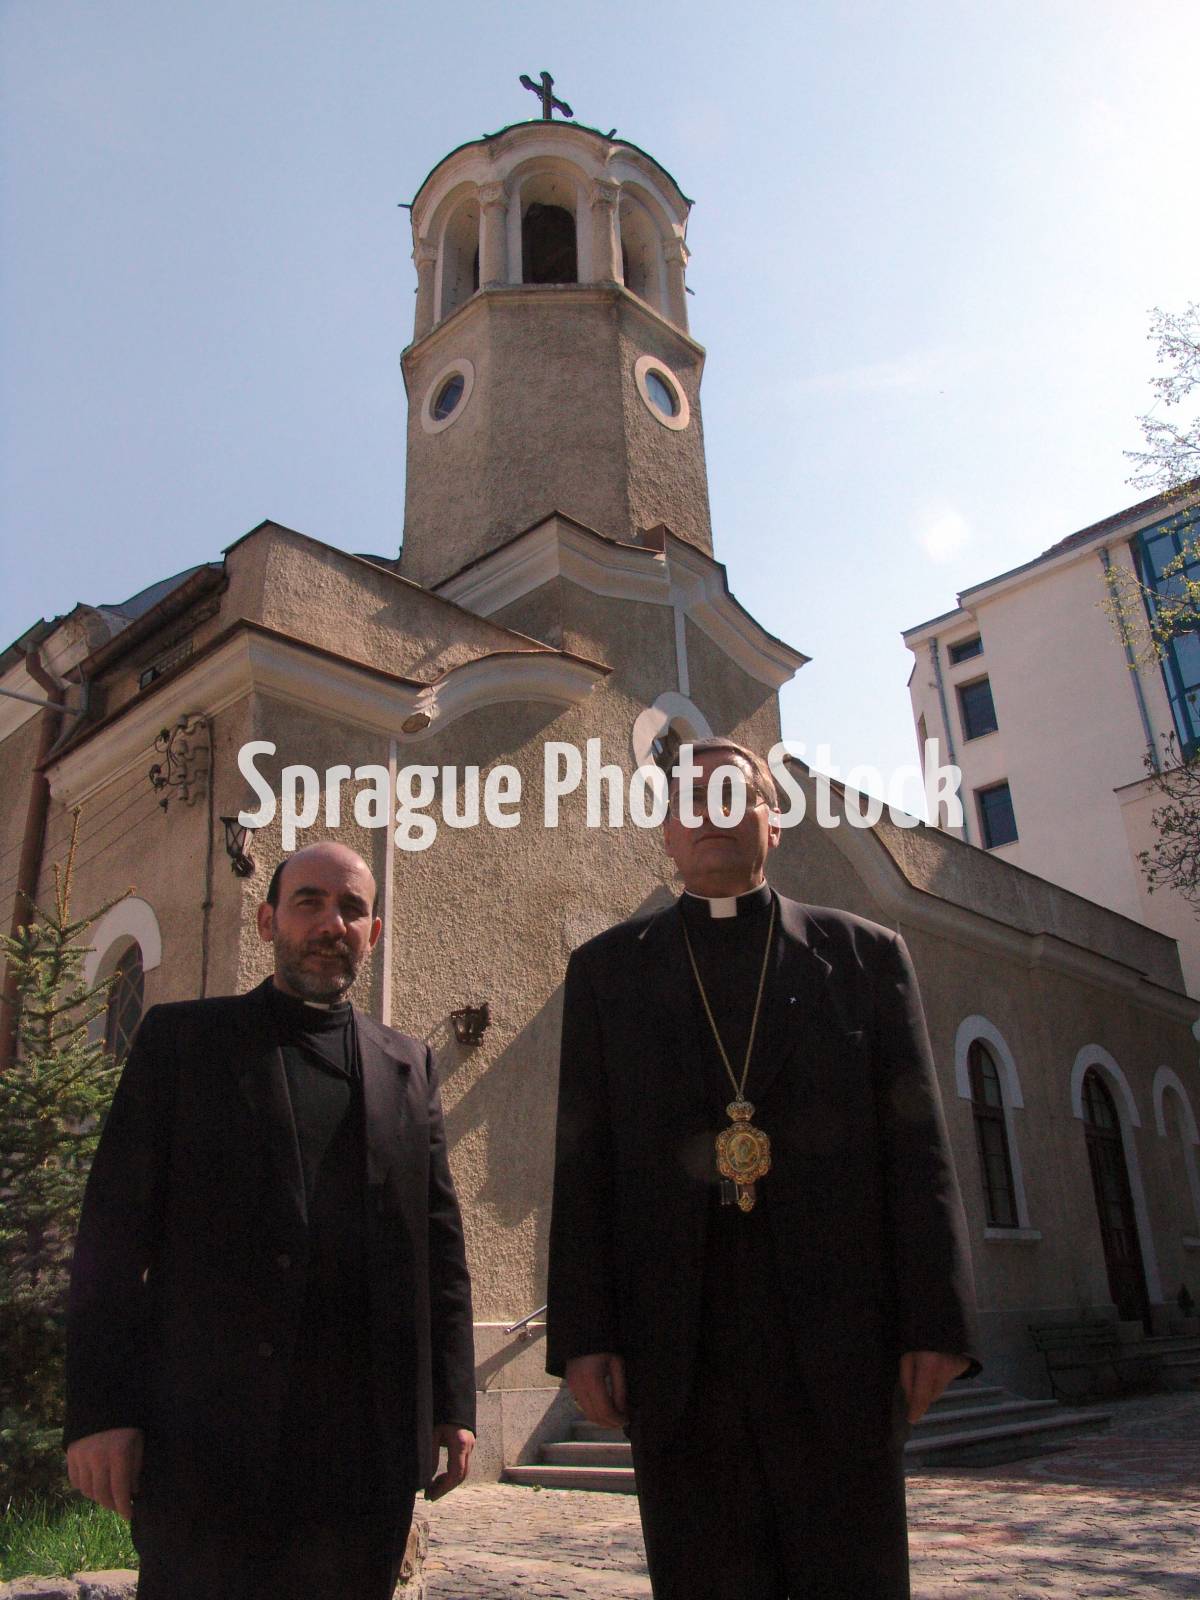 Bishop Christo Proykov (right) standing with Father Blagovast, standing in front of the Assumption church, Sofia. They are Byzantine Catholics. Bulgaria.